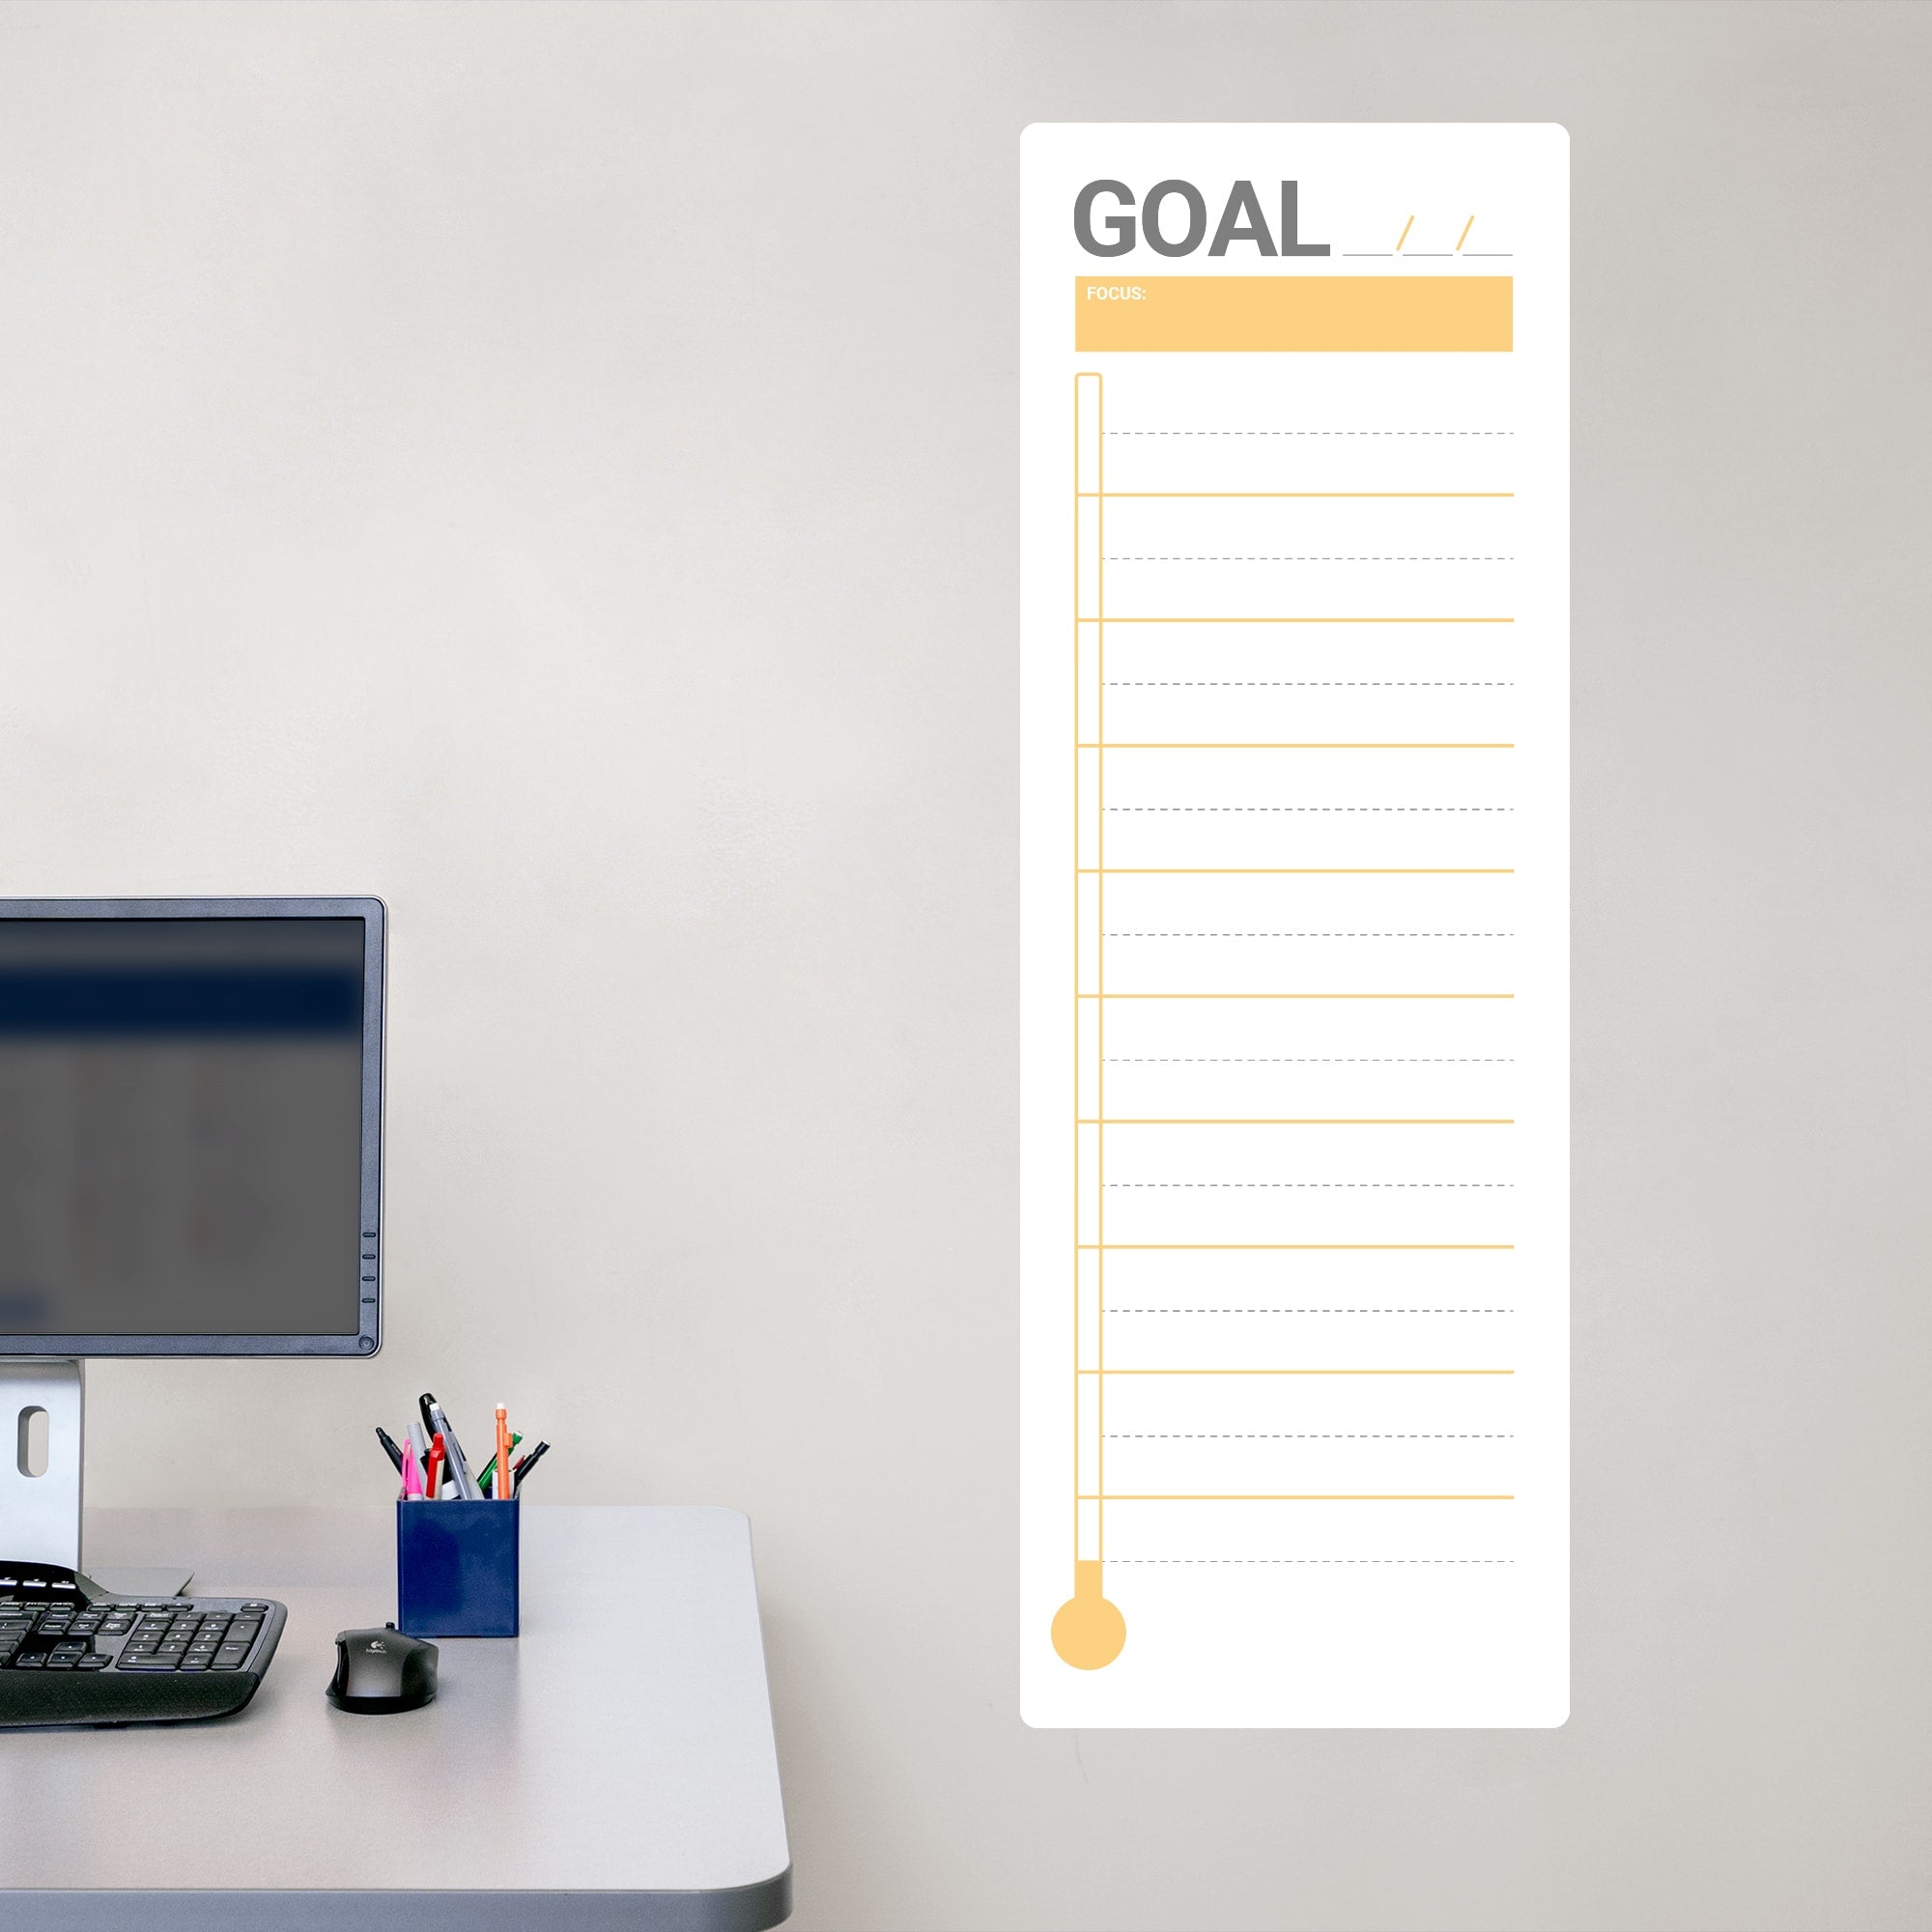 Goal Thermometer: Minamalist Design - Removable Dry Erase Vinyl Decal in Yellow by Fathead